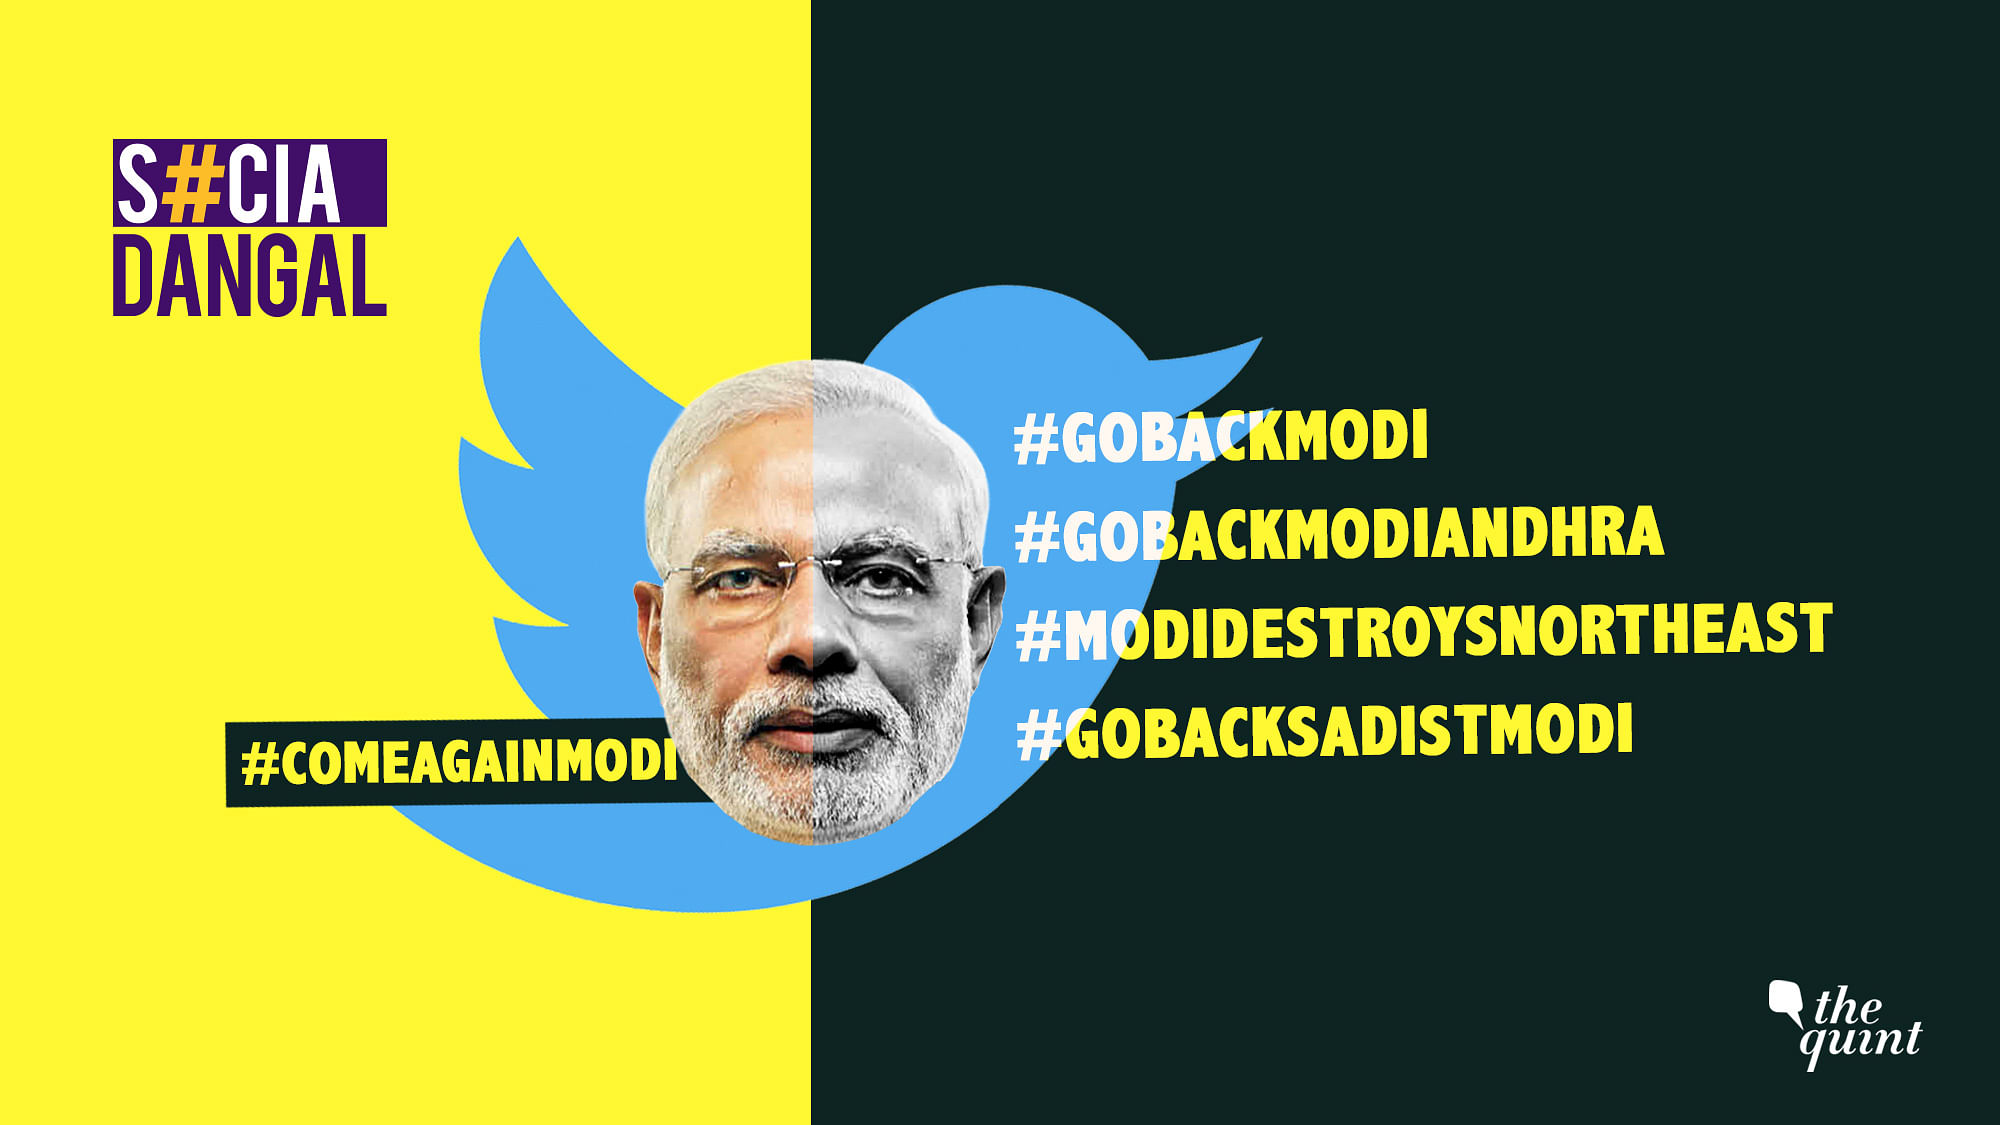 PM Modi faced a fair bit of resistance both online and offline on his recent visits.